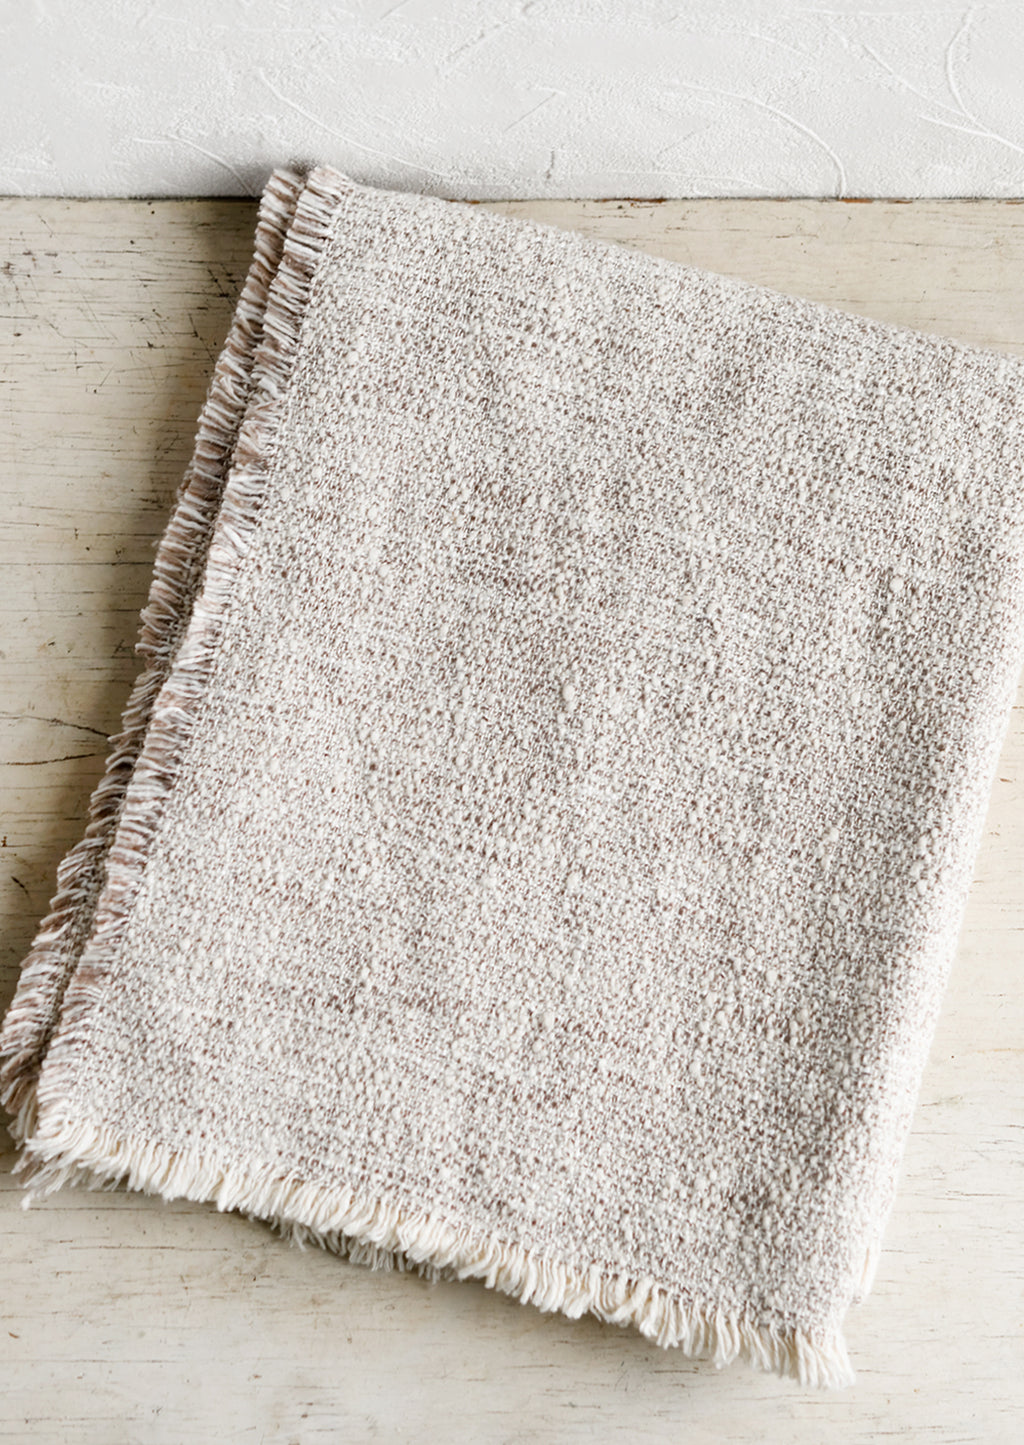 3: A textured boucle blanket with fringe trim in tan/white.